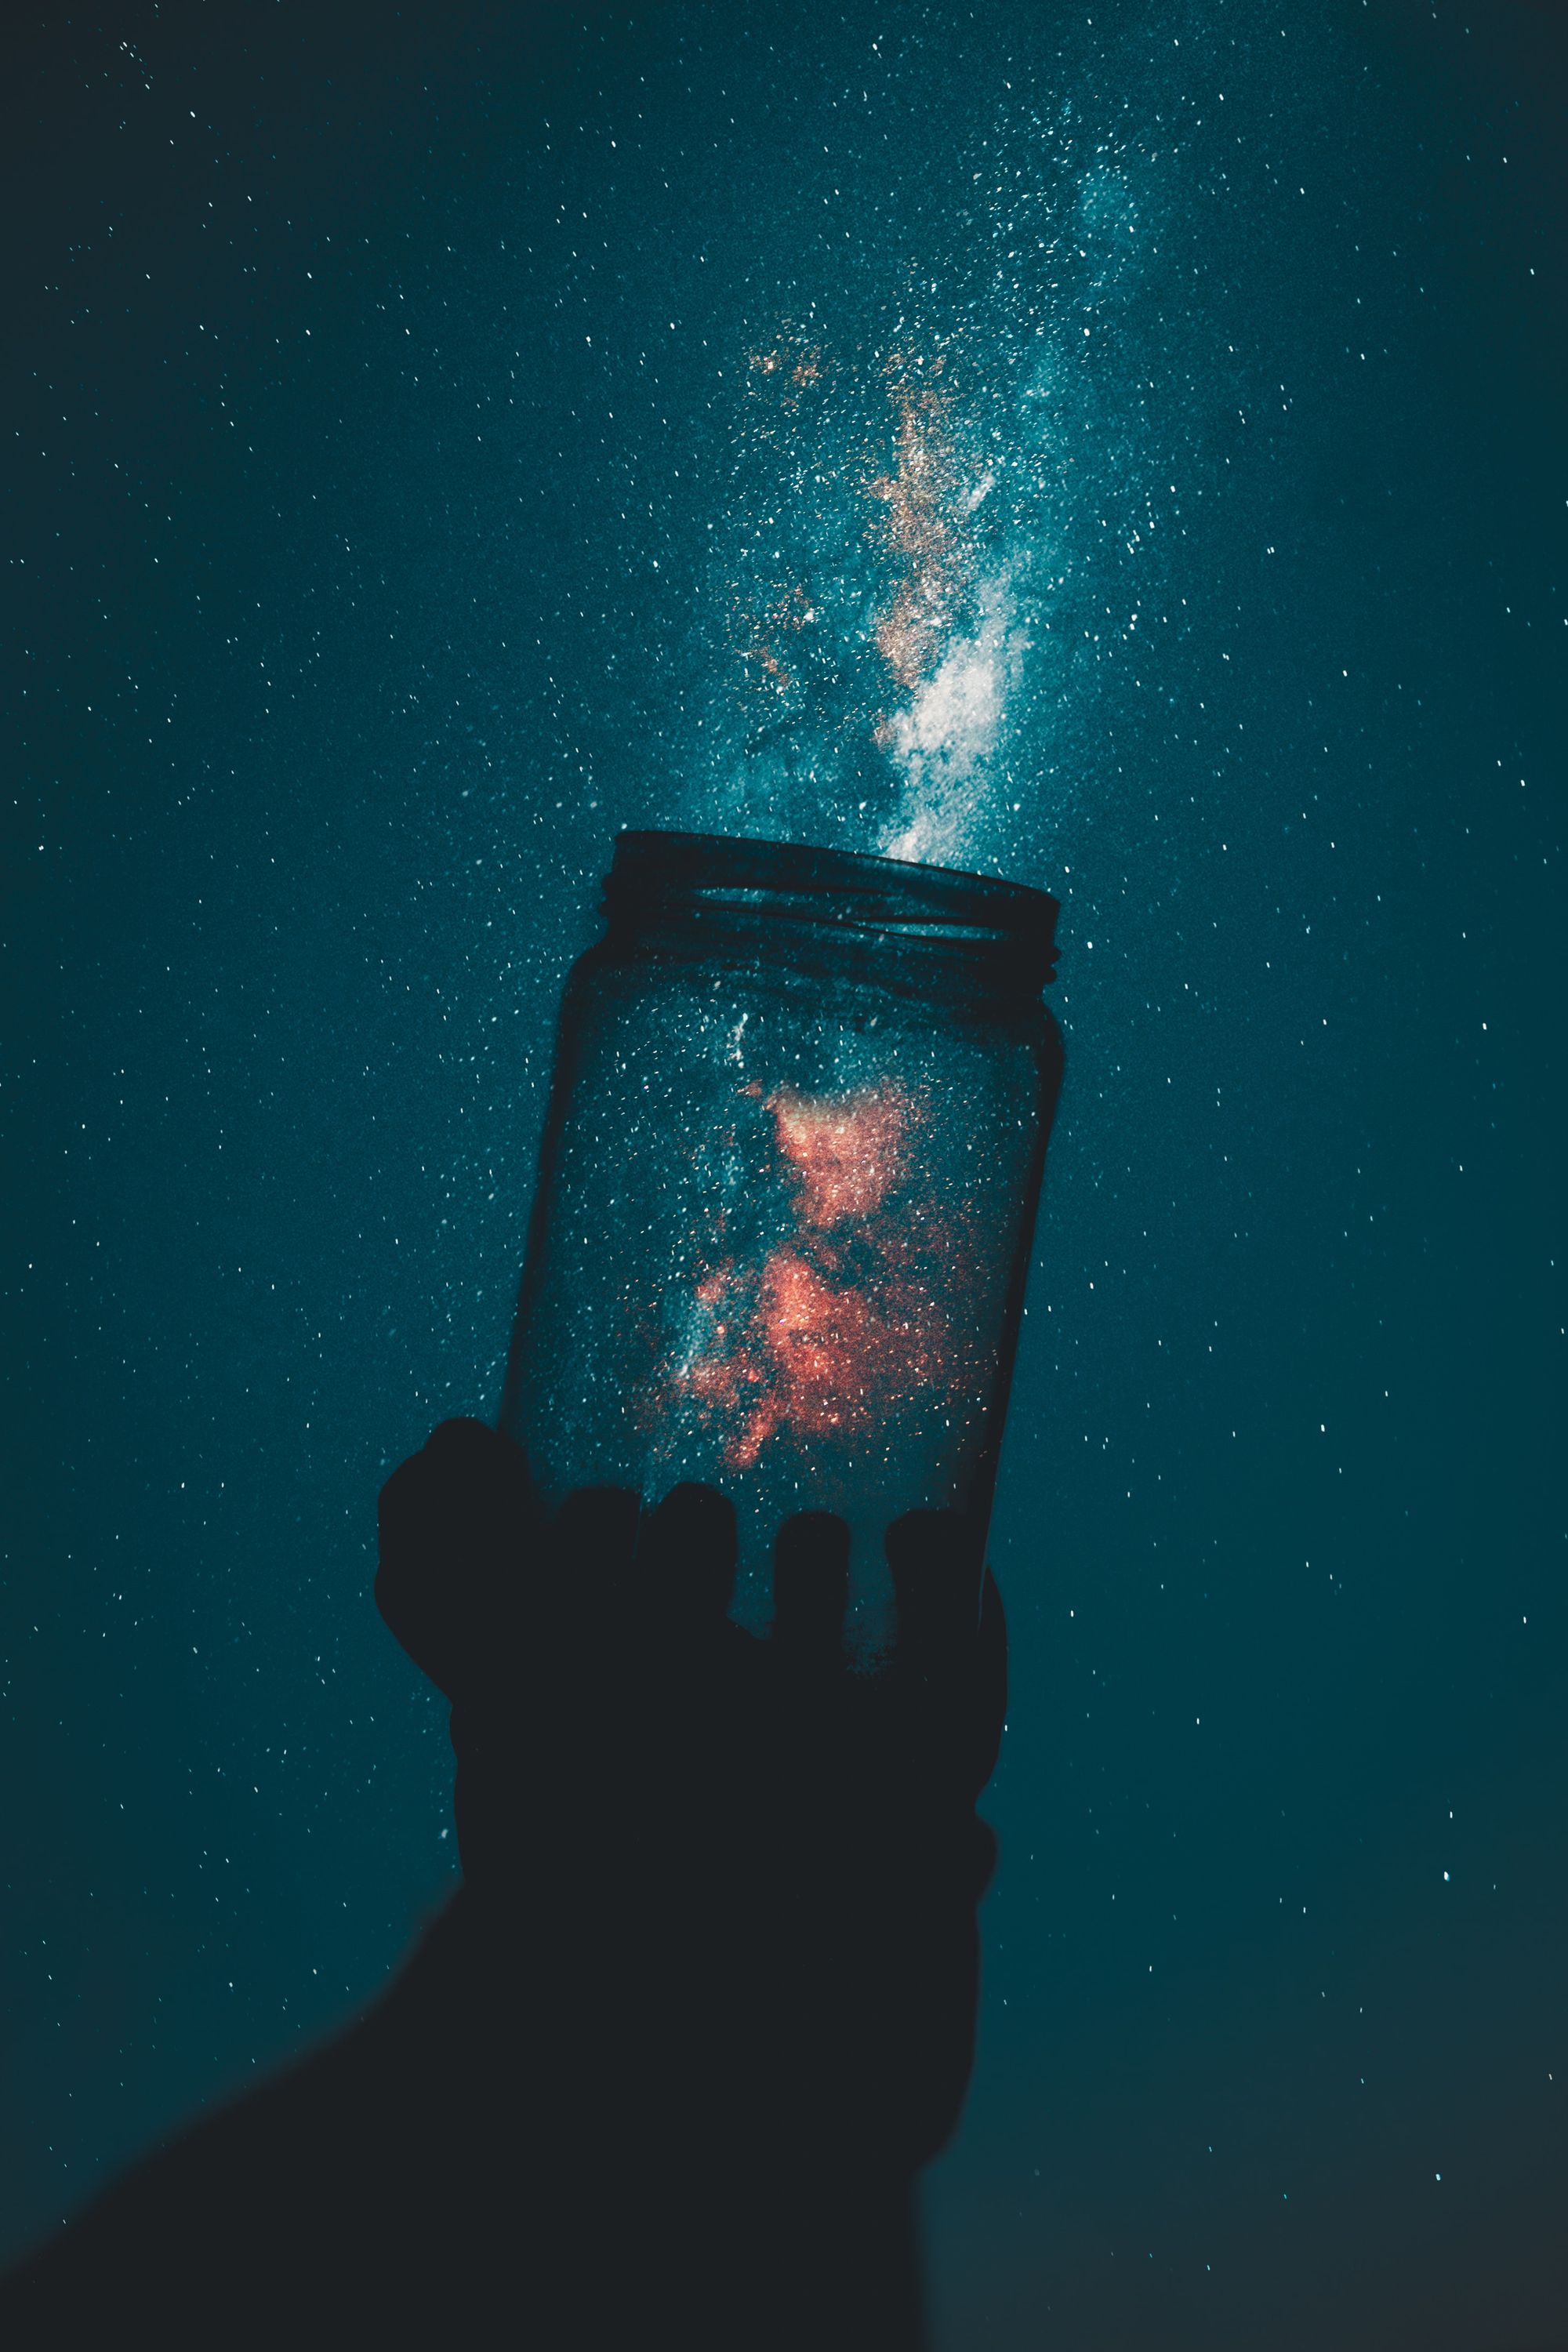 A glass jar looks to be capturing or releasing a galaxy of stars